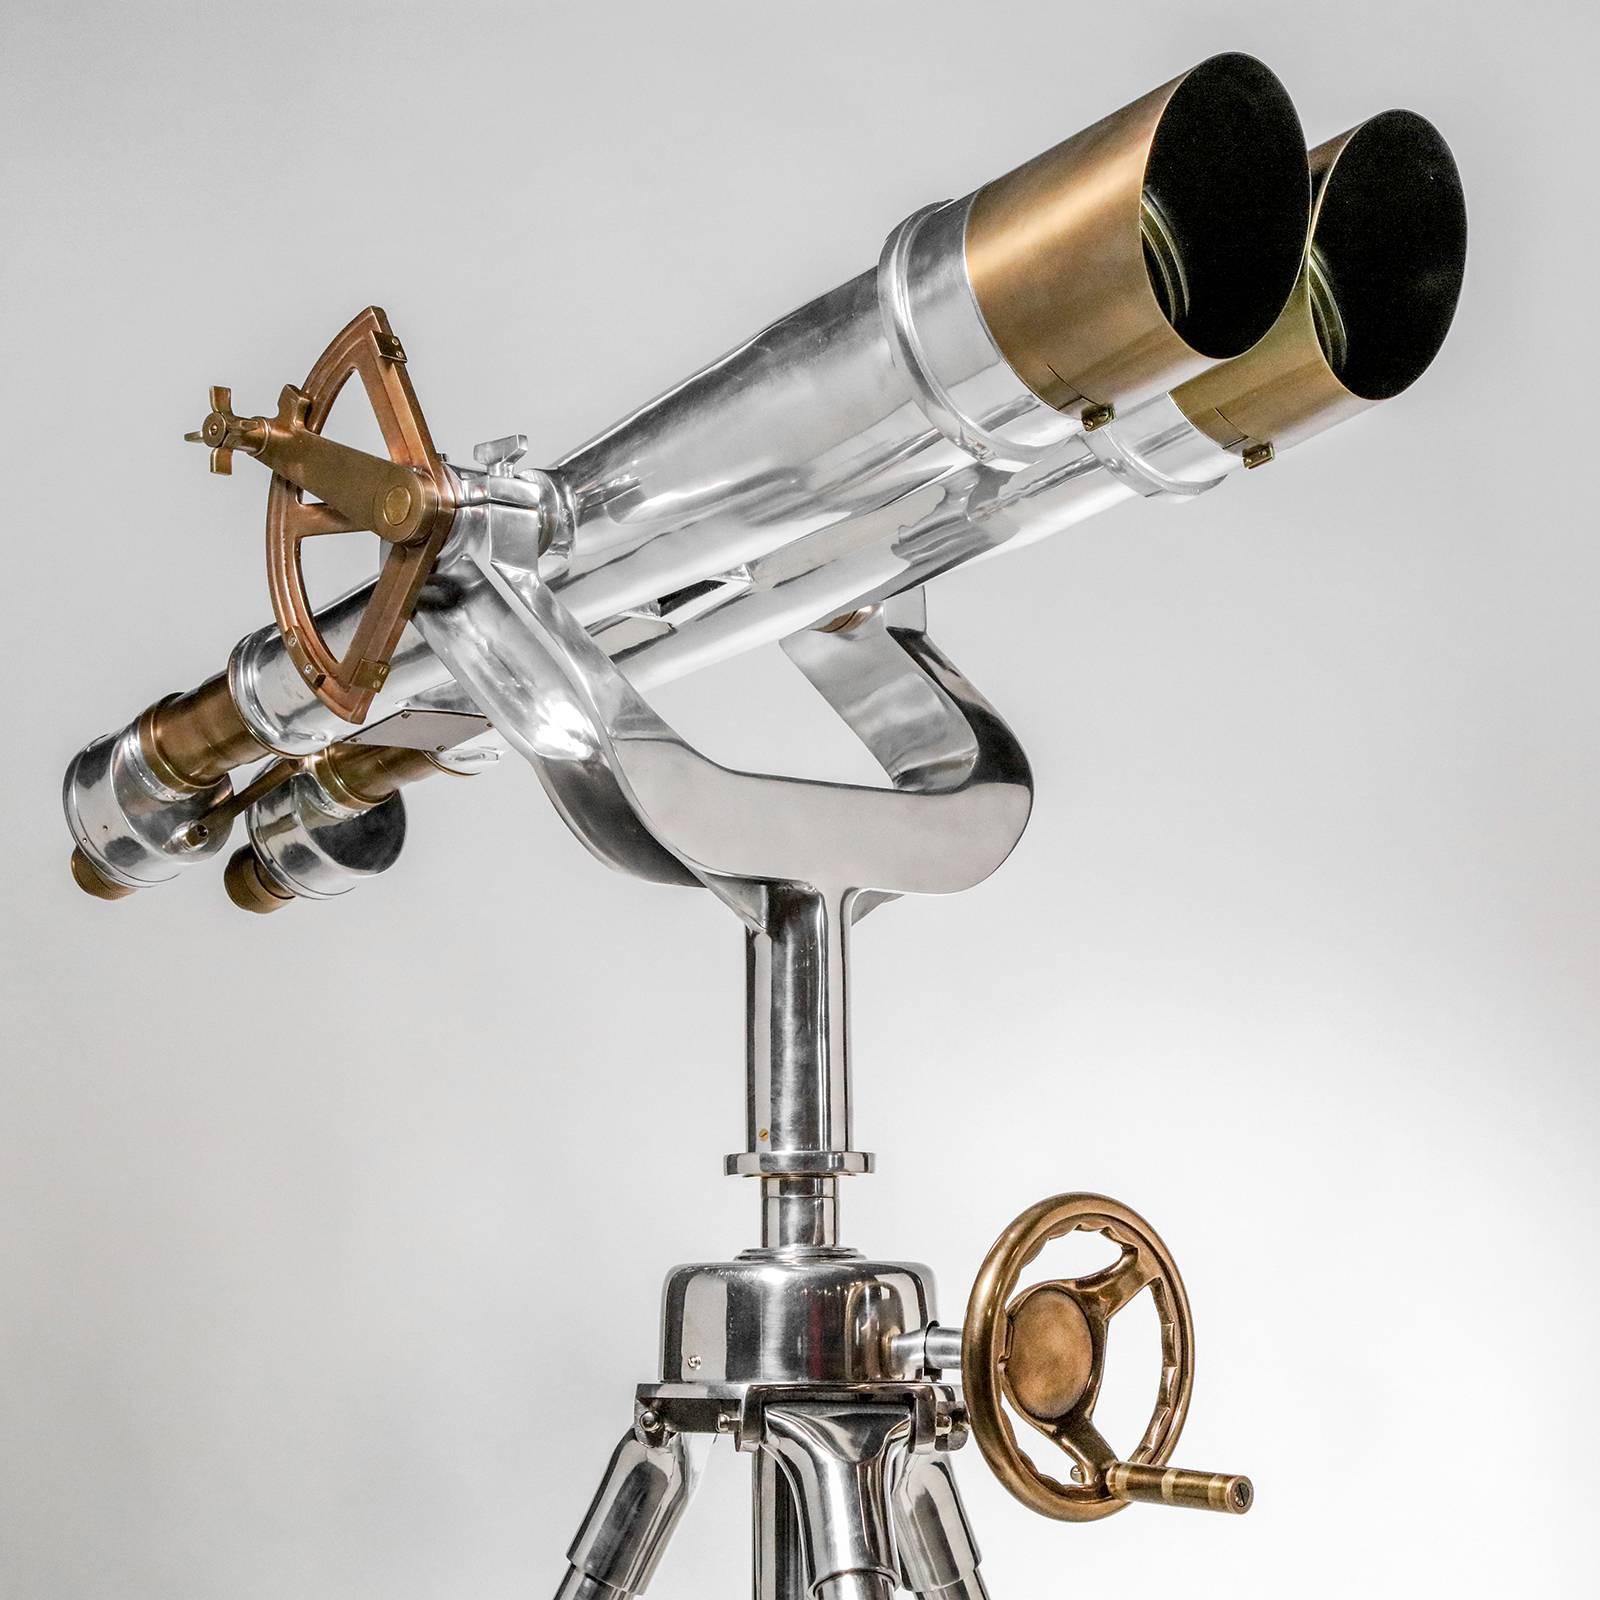 Large pair of field binoculars on adjustable tripod stand. Nickel-plated with brass accents.